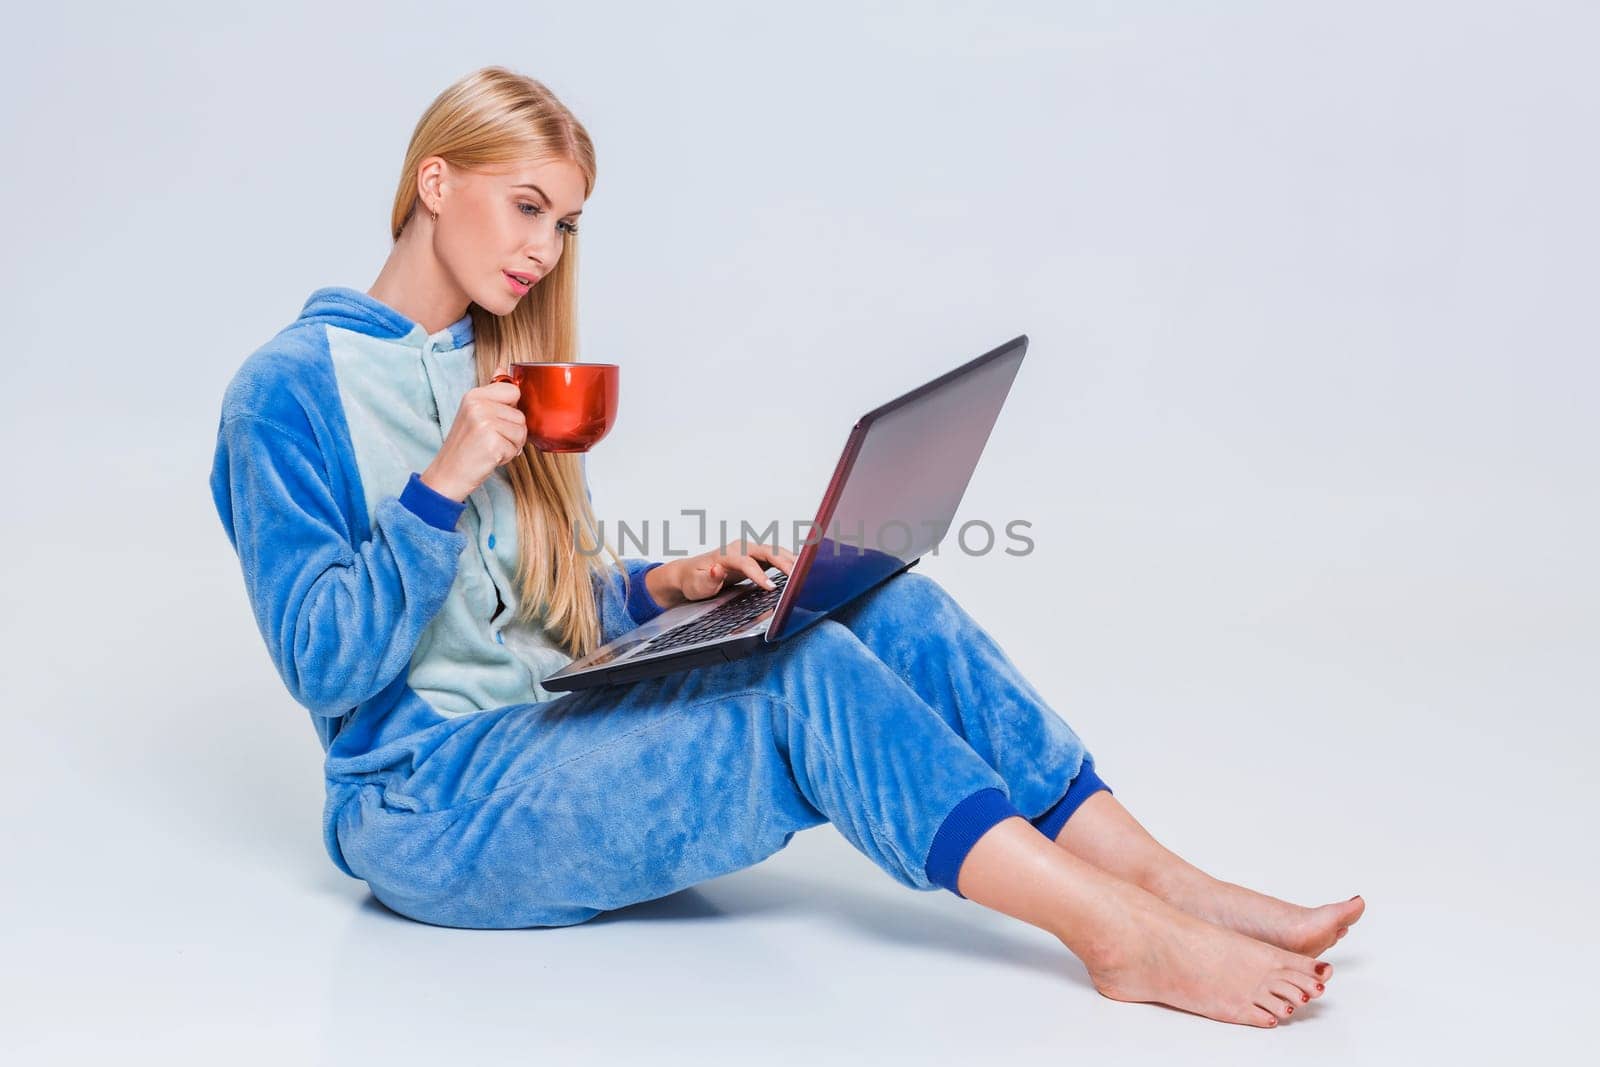 girl in pajamas with a laptop lying on the floor. studying or doing online shopping. work from home. Satisfied and smiling. drinking coffee or tea